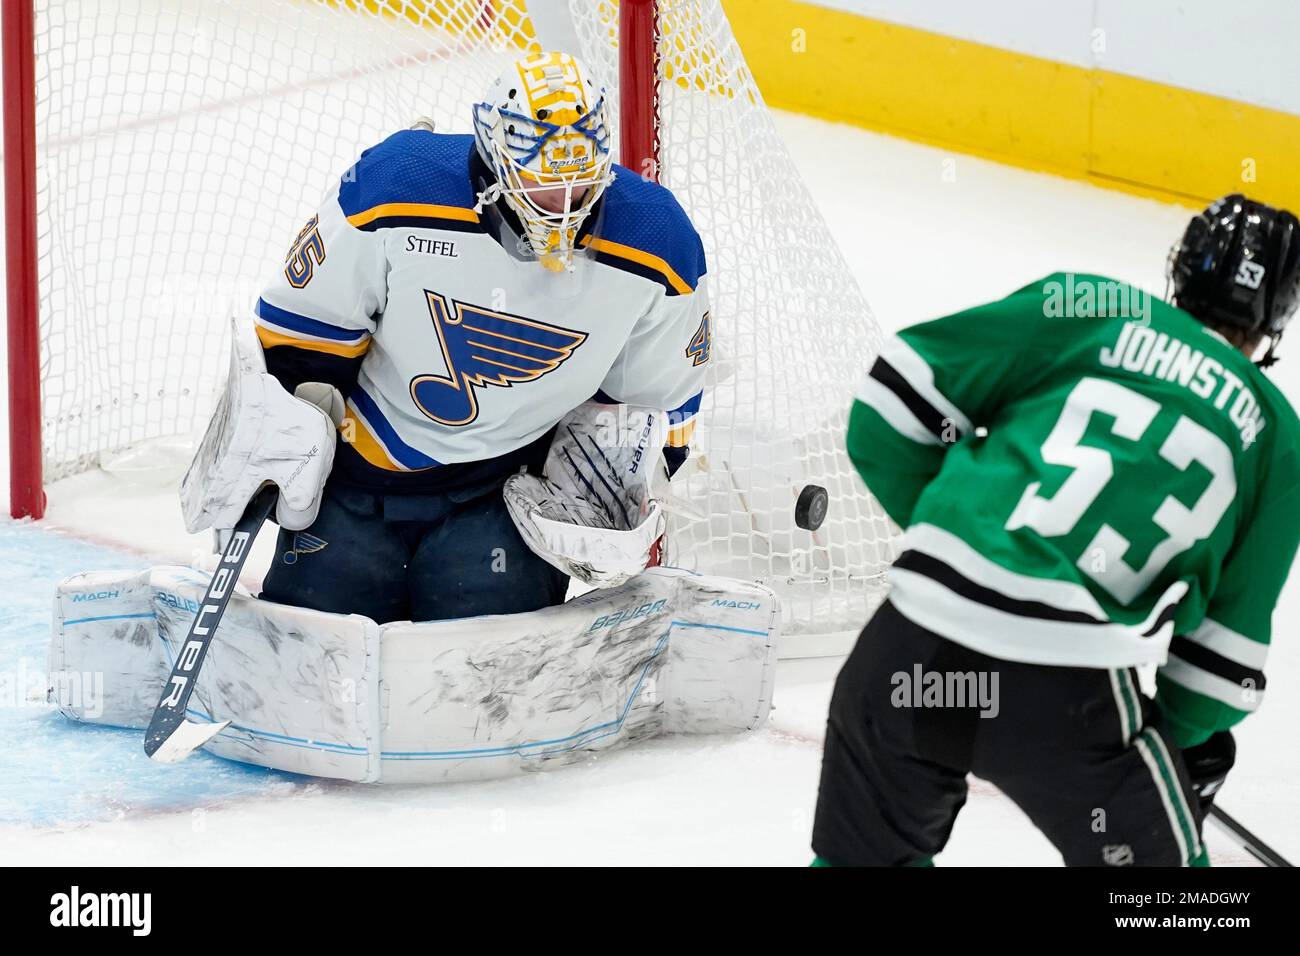 https://c8.alamy.com/comp/2MADGWY/st-louis-blues-goaltender-colten-ellis-45-defends-against-a-shot-by-dallas-stars-center-wyatt-johnston-53-in-the-second-period-of-a-preseason-nhl-hockey-game-in-dallas-monday-sept-26-2022-ap-phototony-gutierrez-2MADGWY.jpg